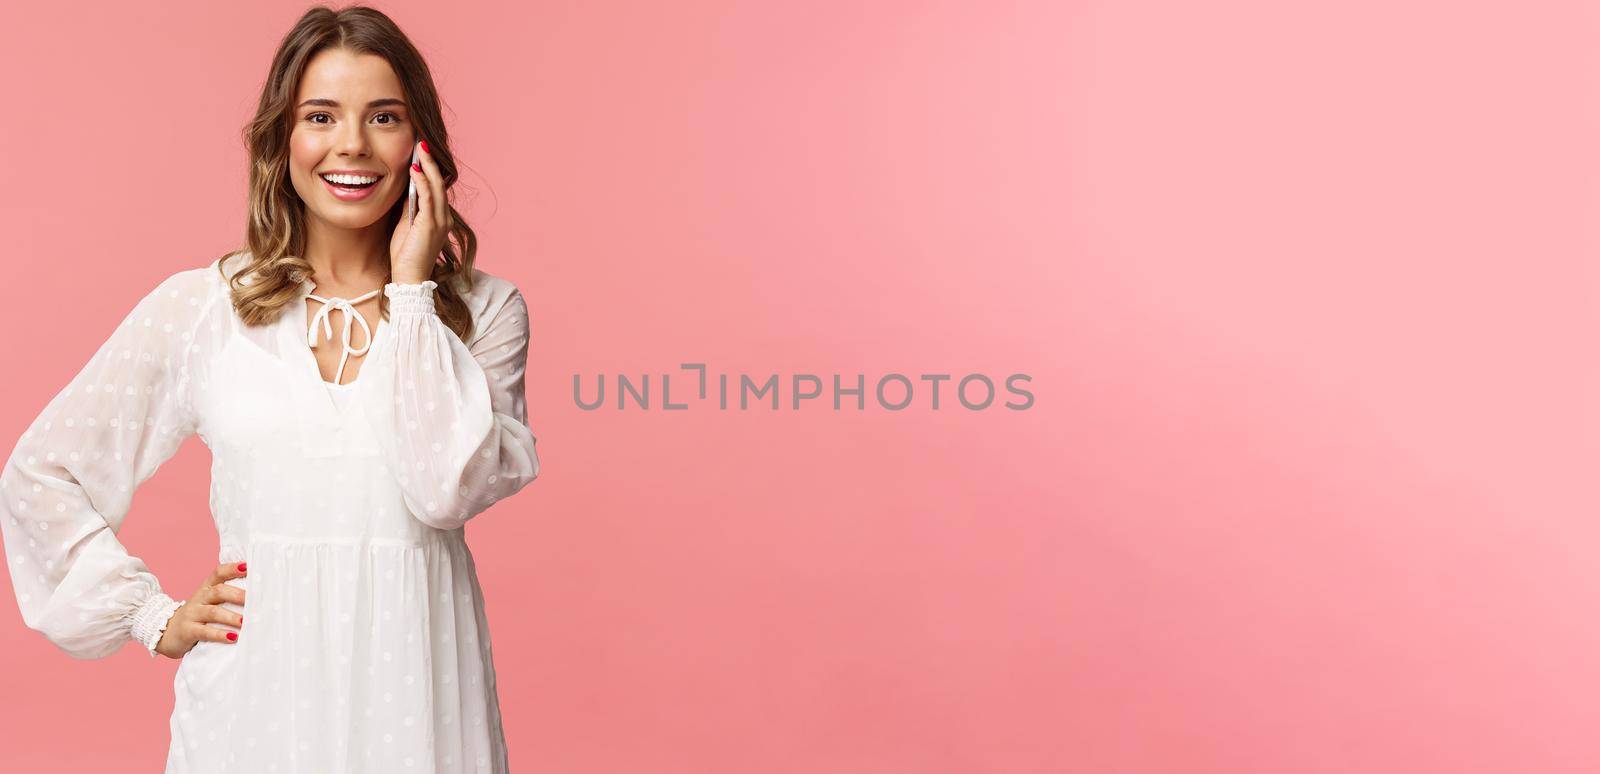 Portrait of joyful good-looking blond woman in white dress, talking on phone, hold smartphone near ear and look upbeat camera, smiling discuss friends date, stand pink background.